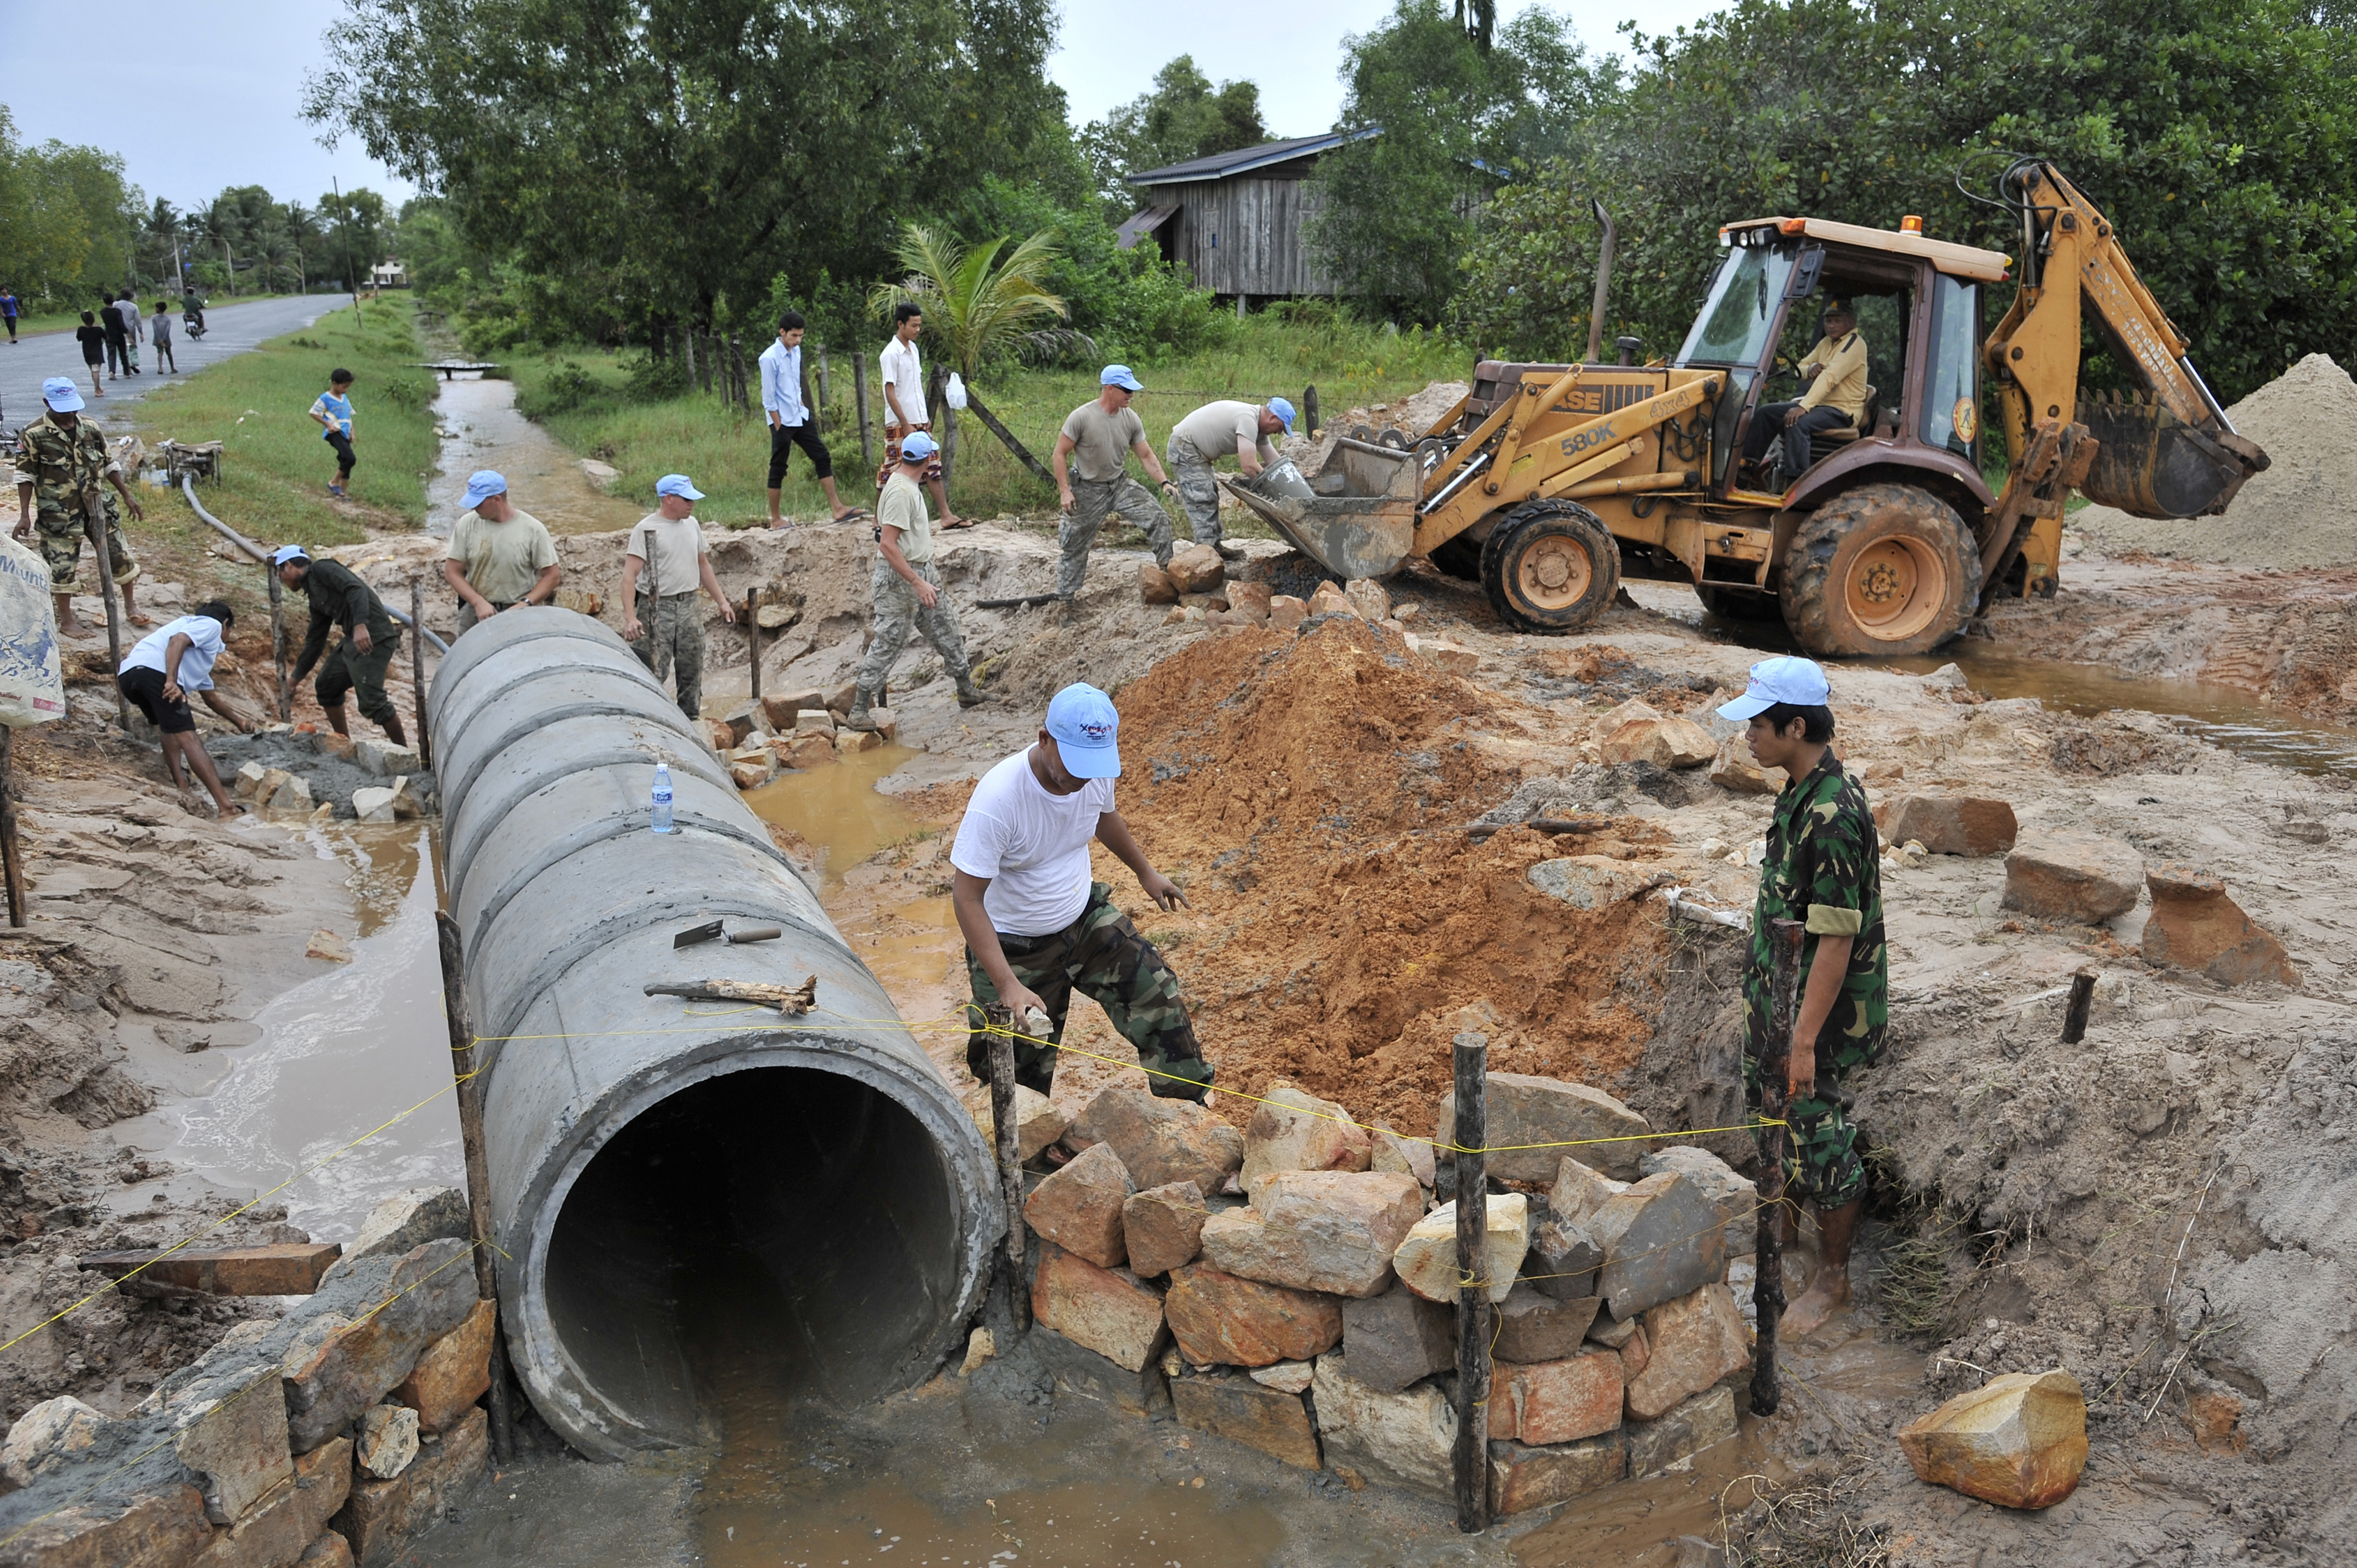 U.S. and RCAF civil engineers improve lives in Cambodia > U.S. Air Force >  Article Display